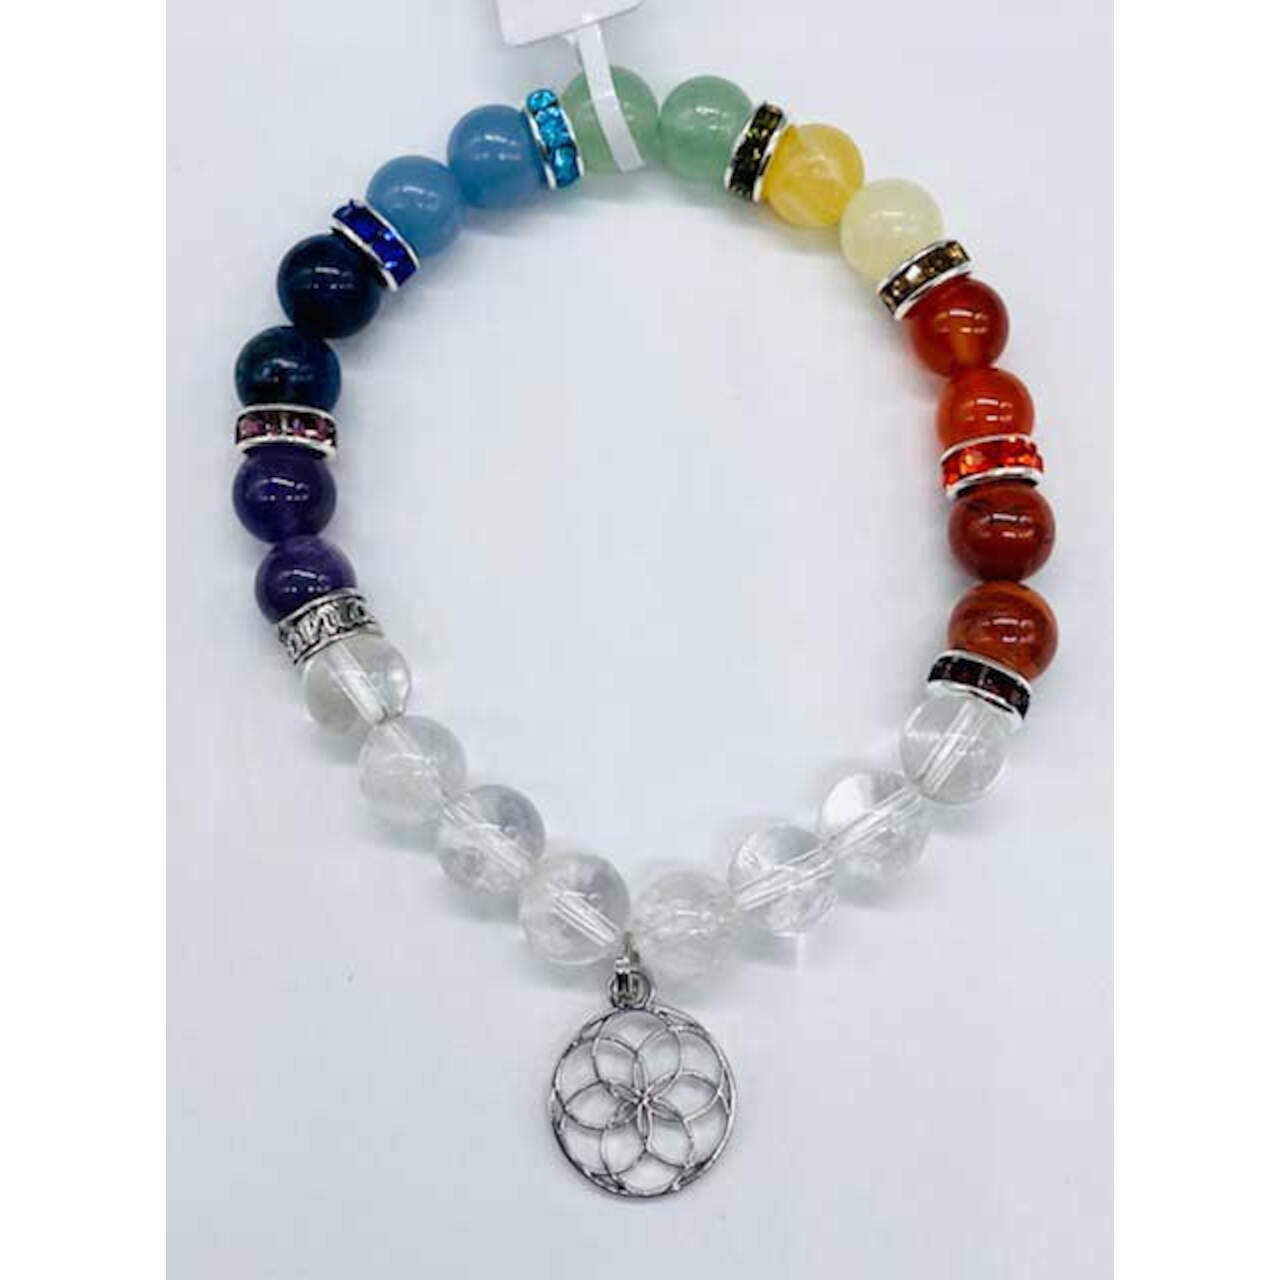 7 Chakras Crystal Bracelet With Charms 8mm Beads Crown, Third Eye